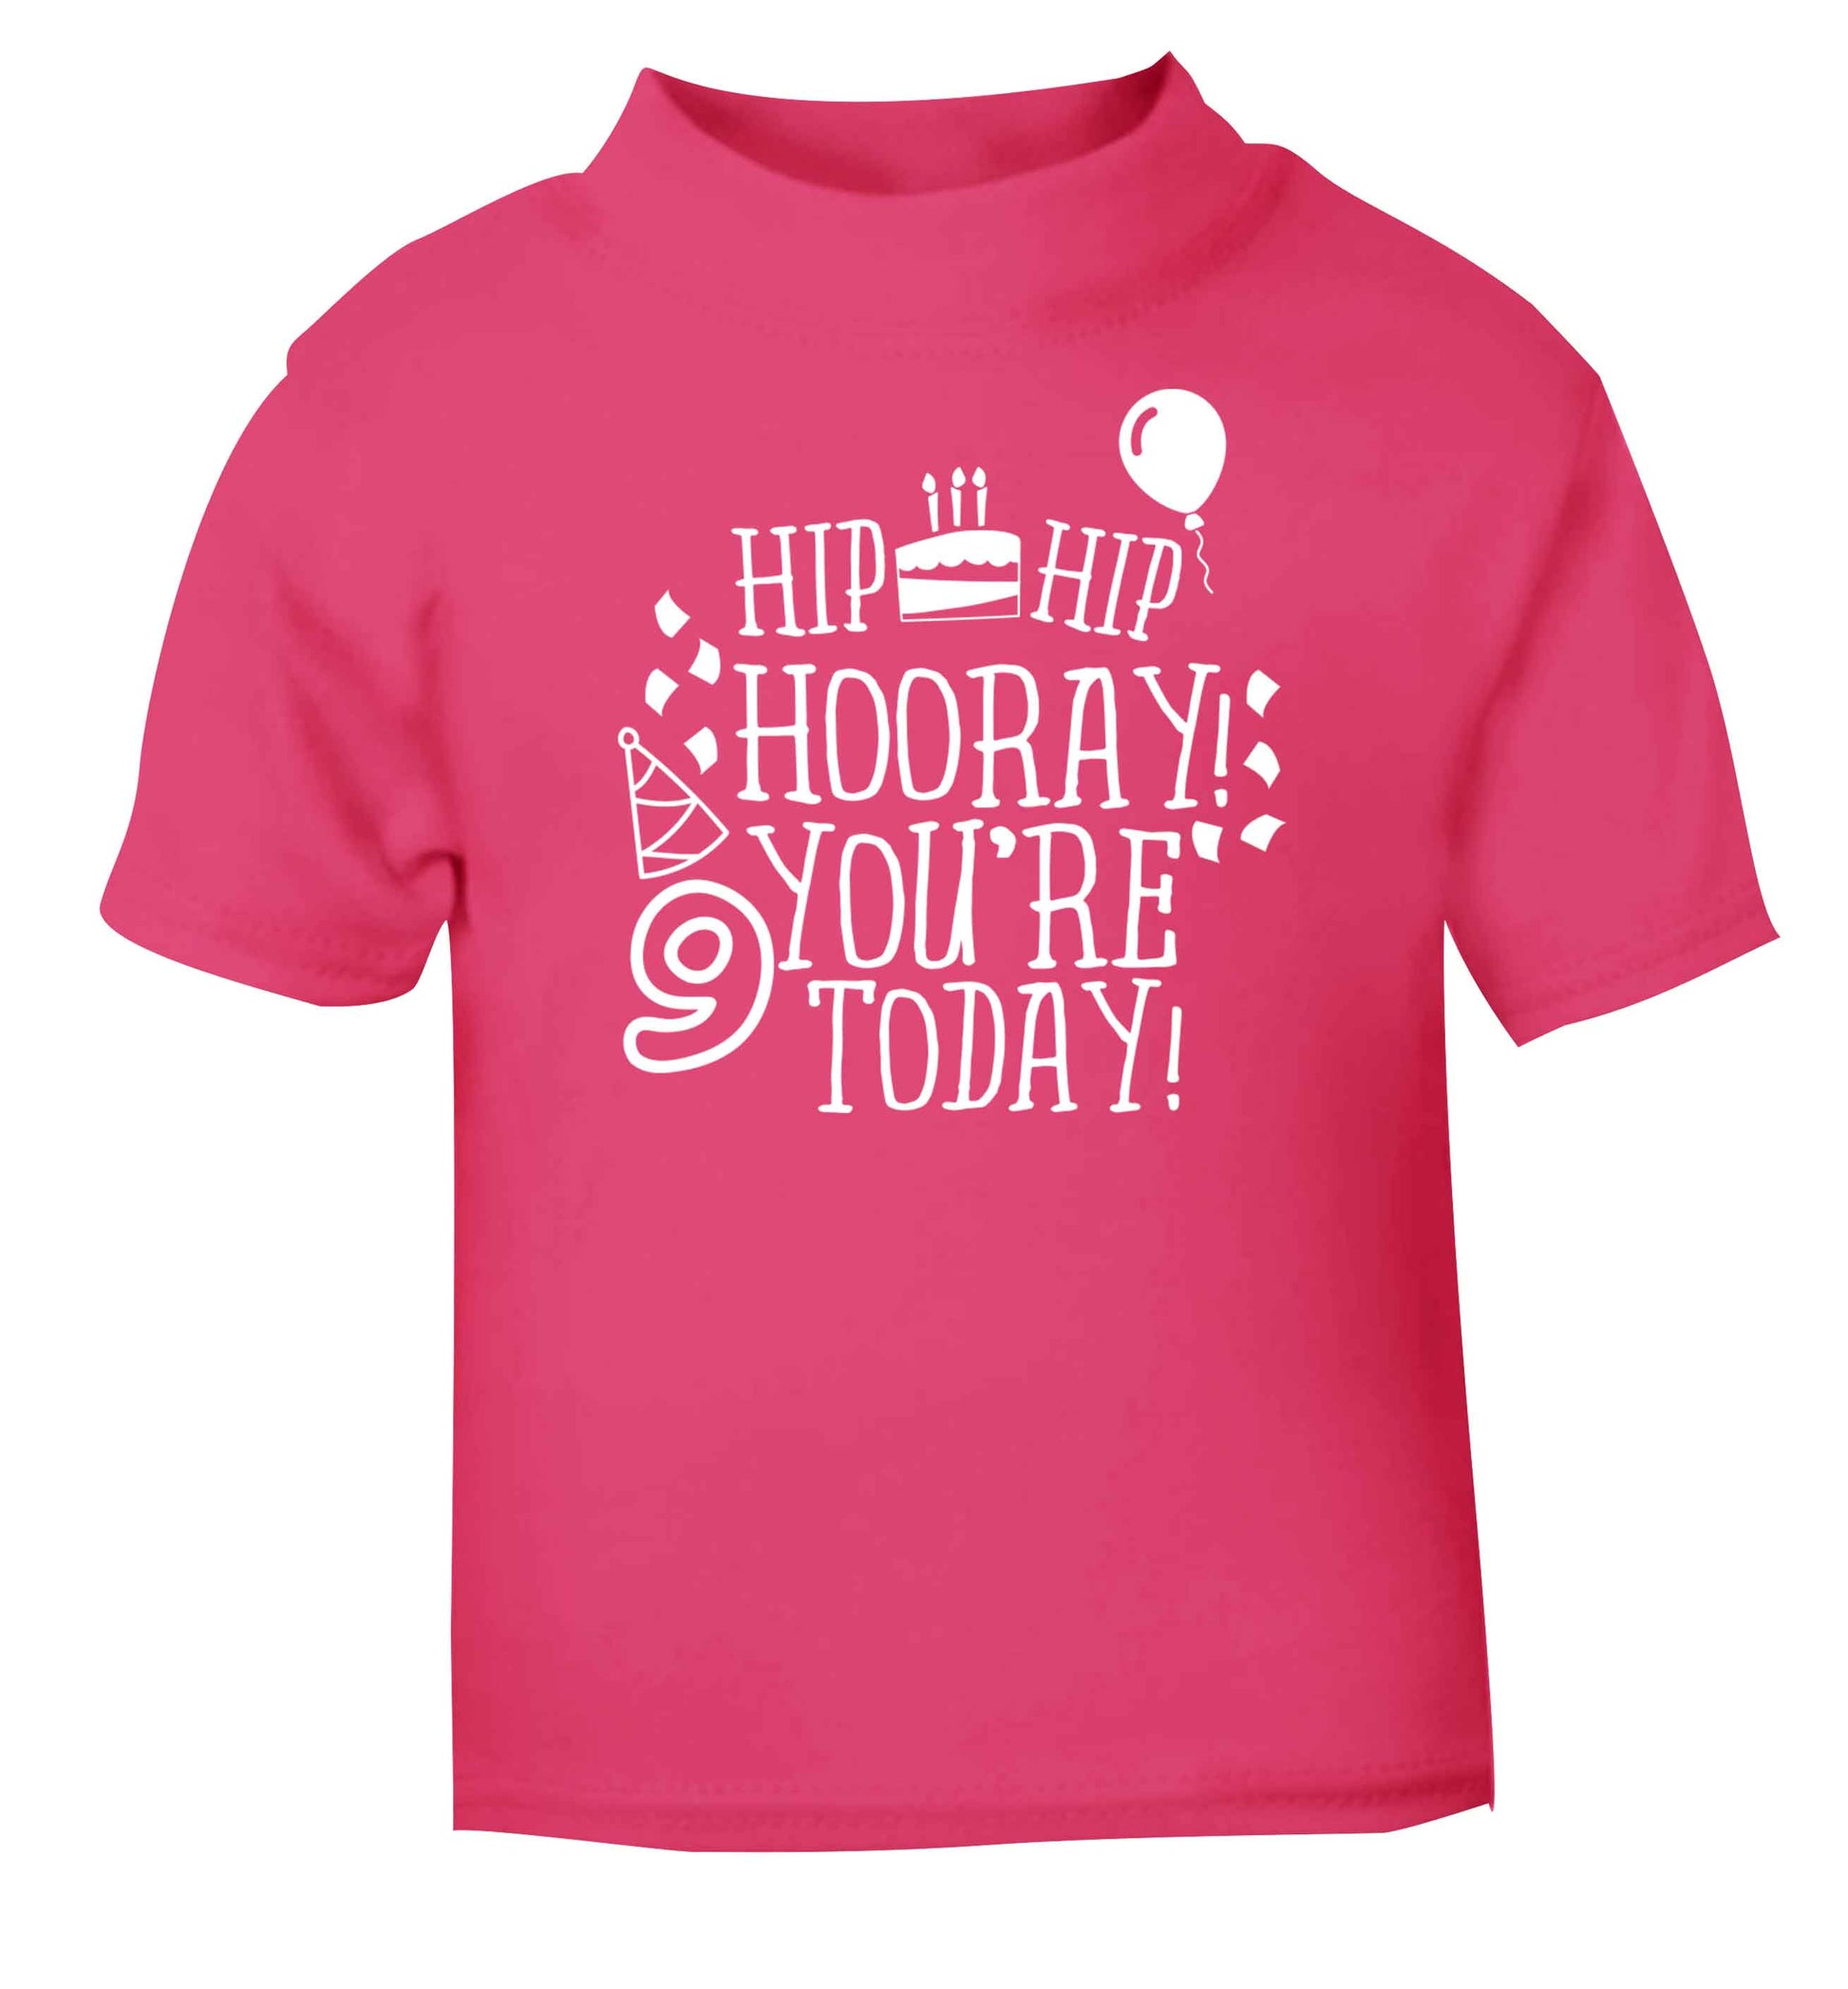 Hip hip hooray you're 9 today! pink baby toddler Tshirt 2 Years